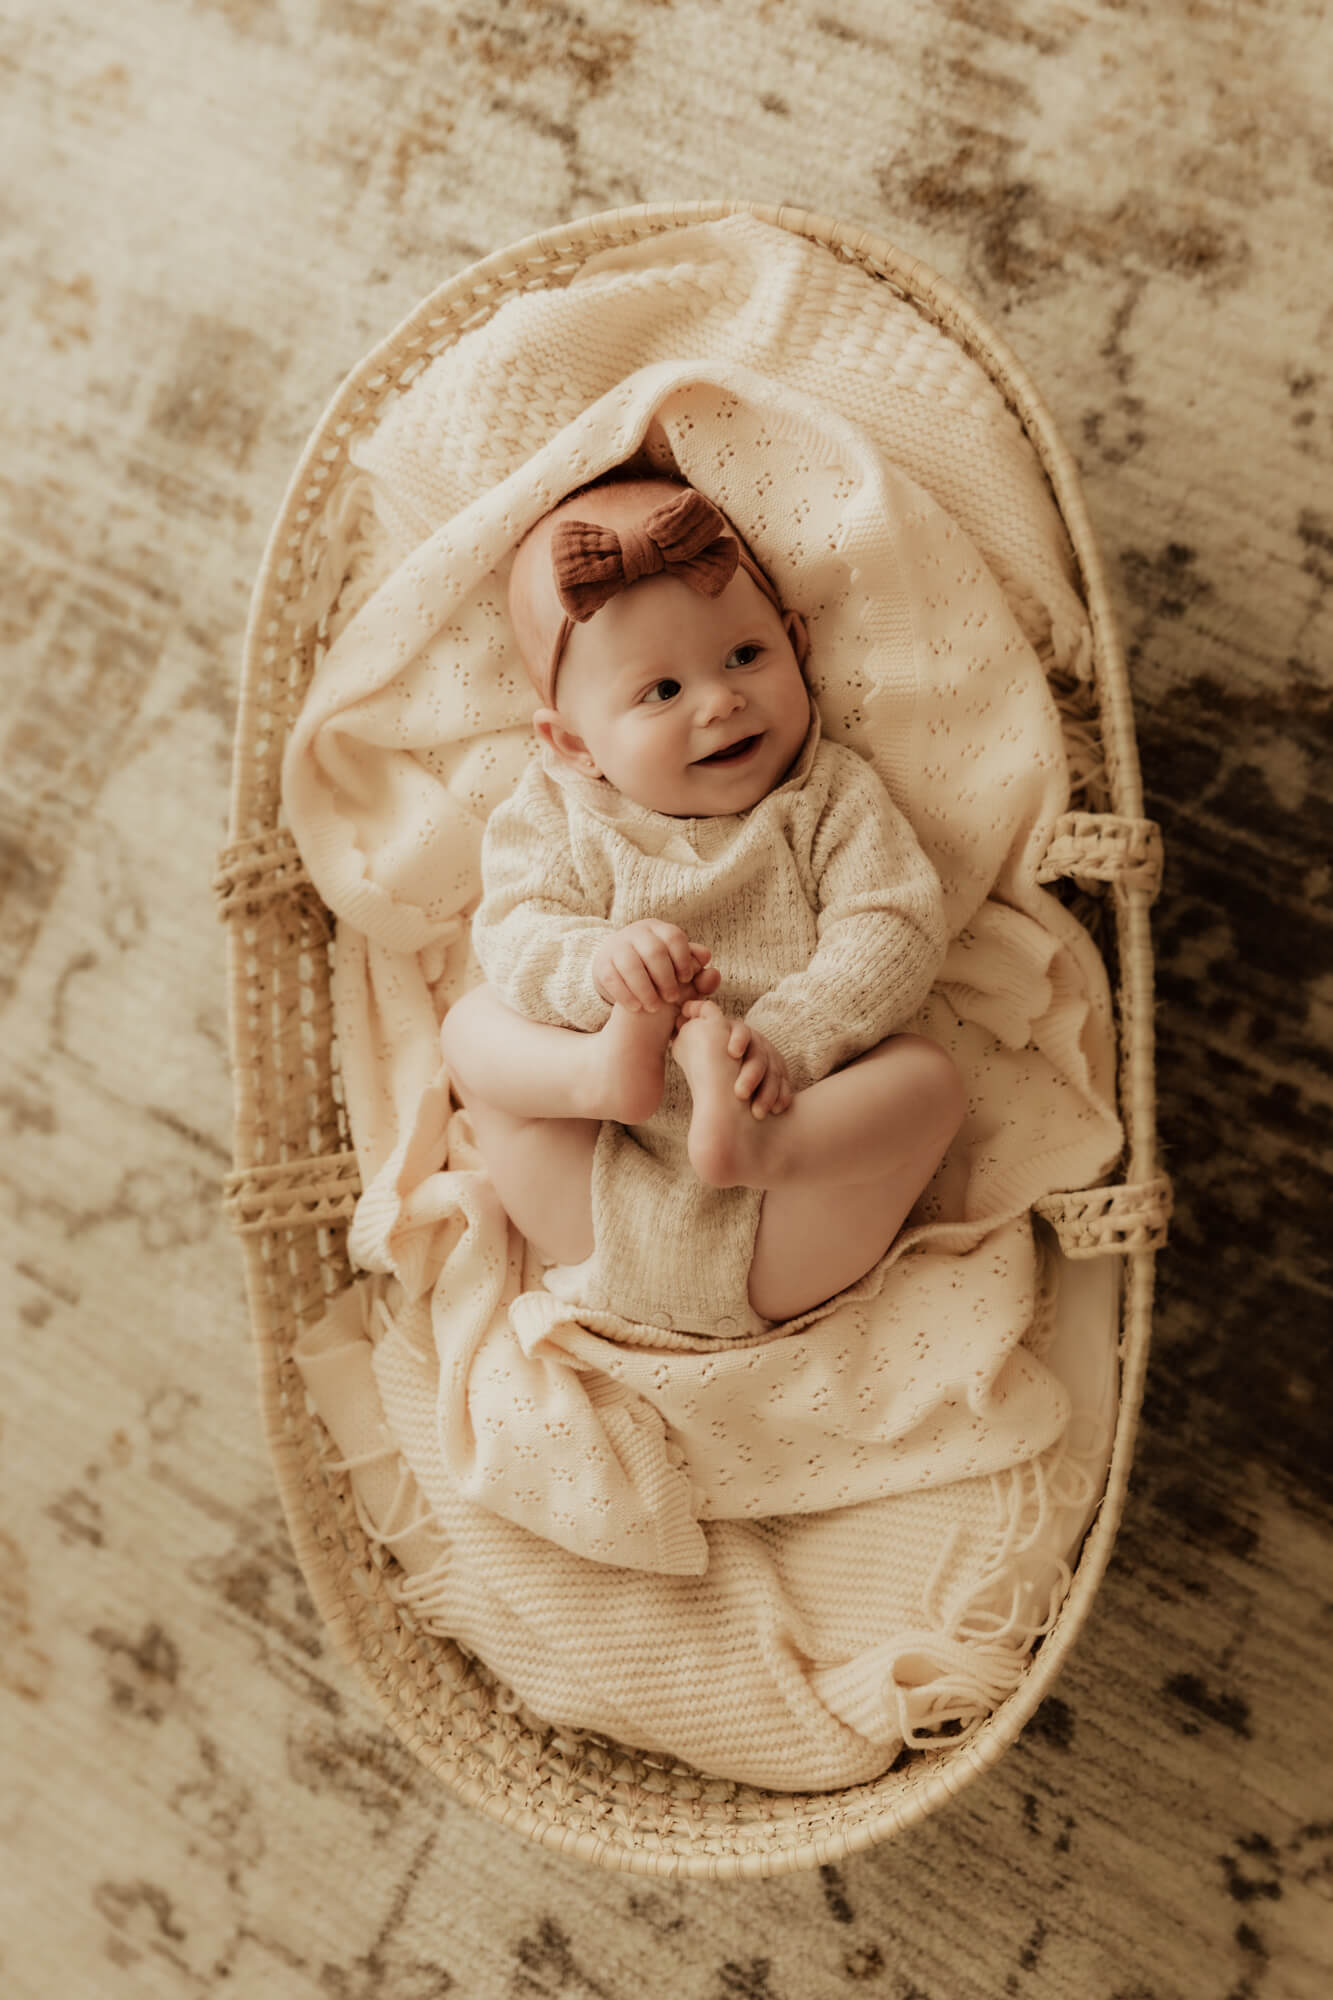 Baby laying in basket and smiling. 